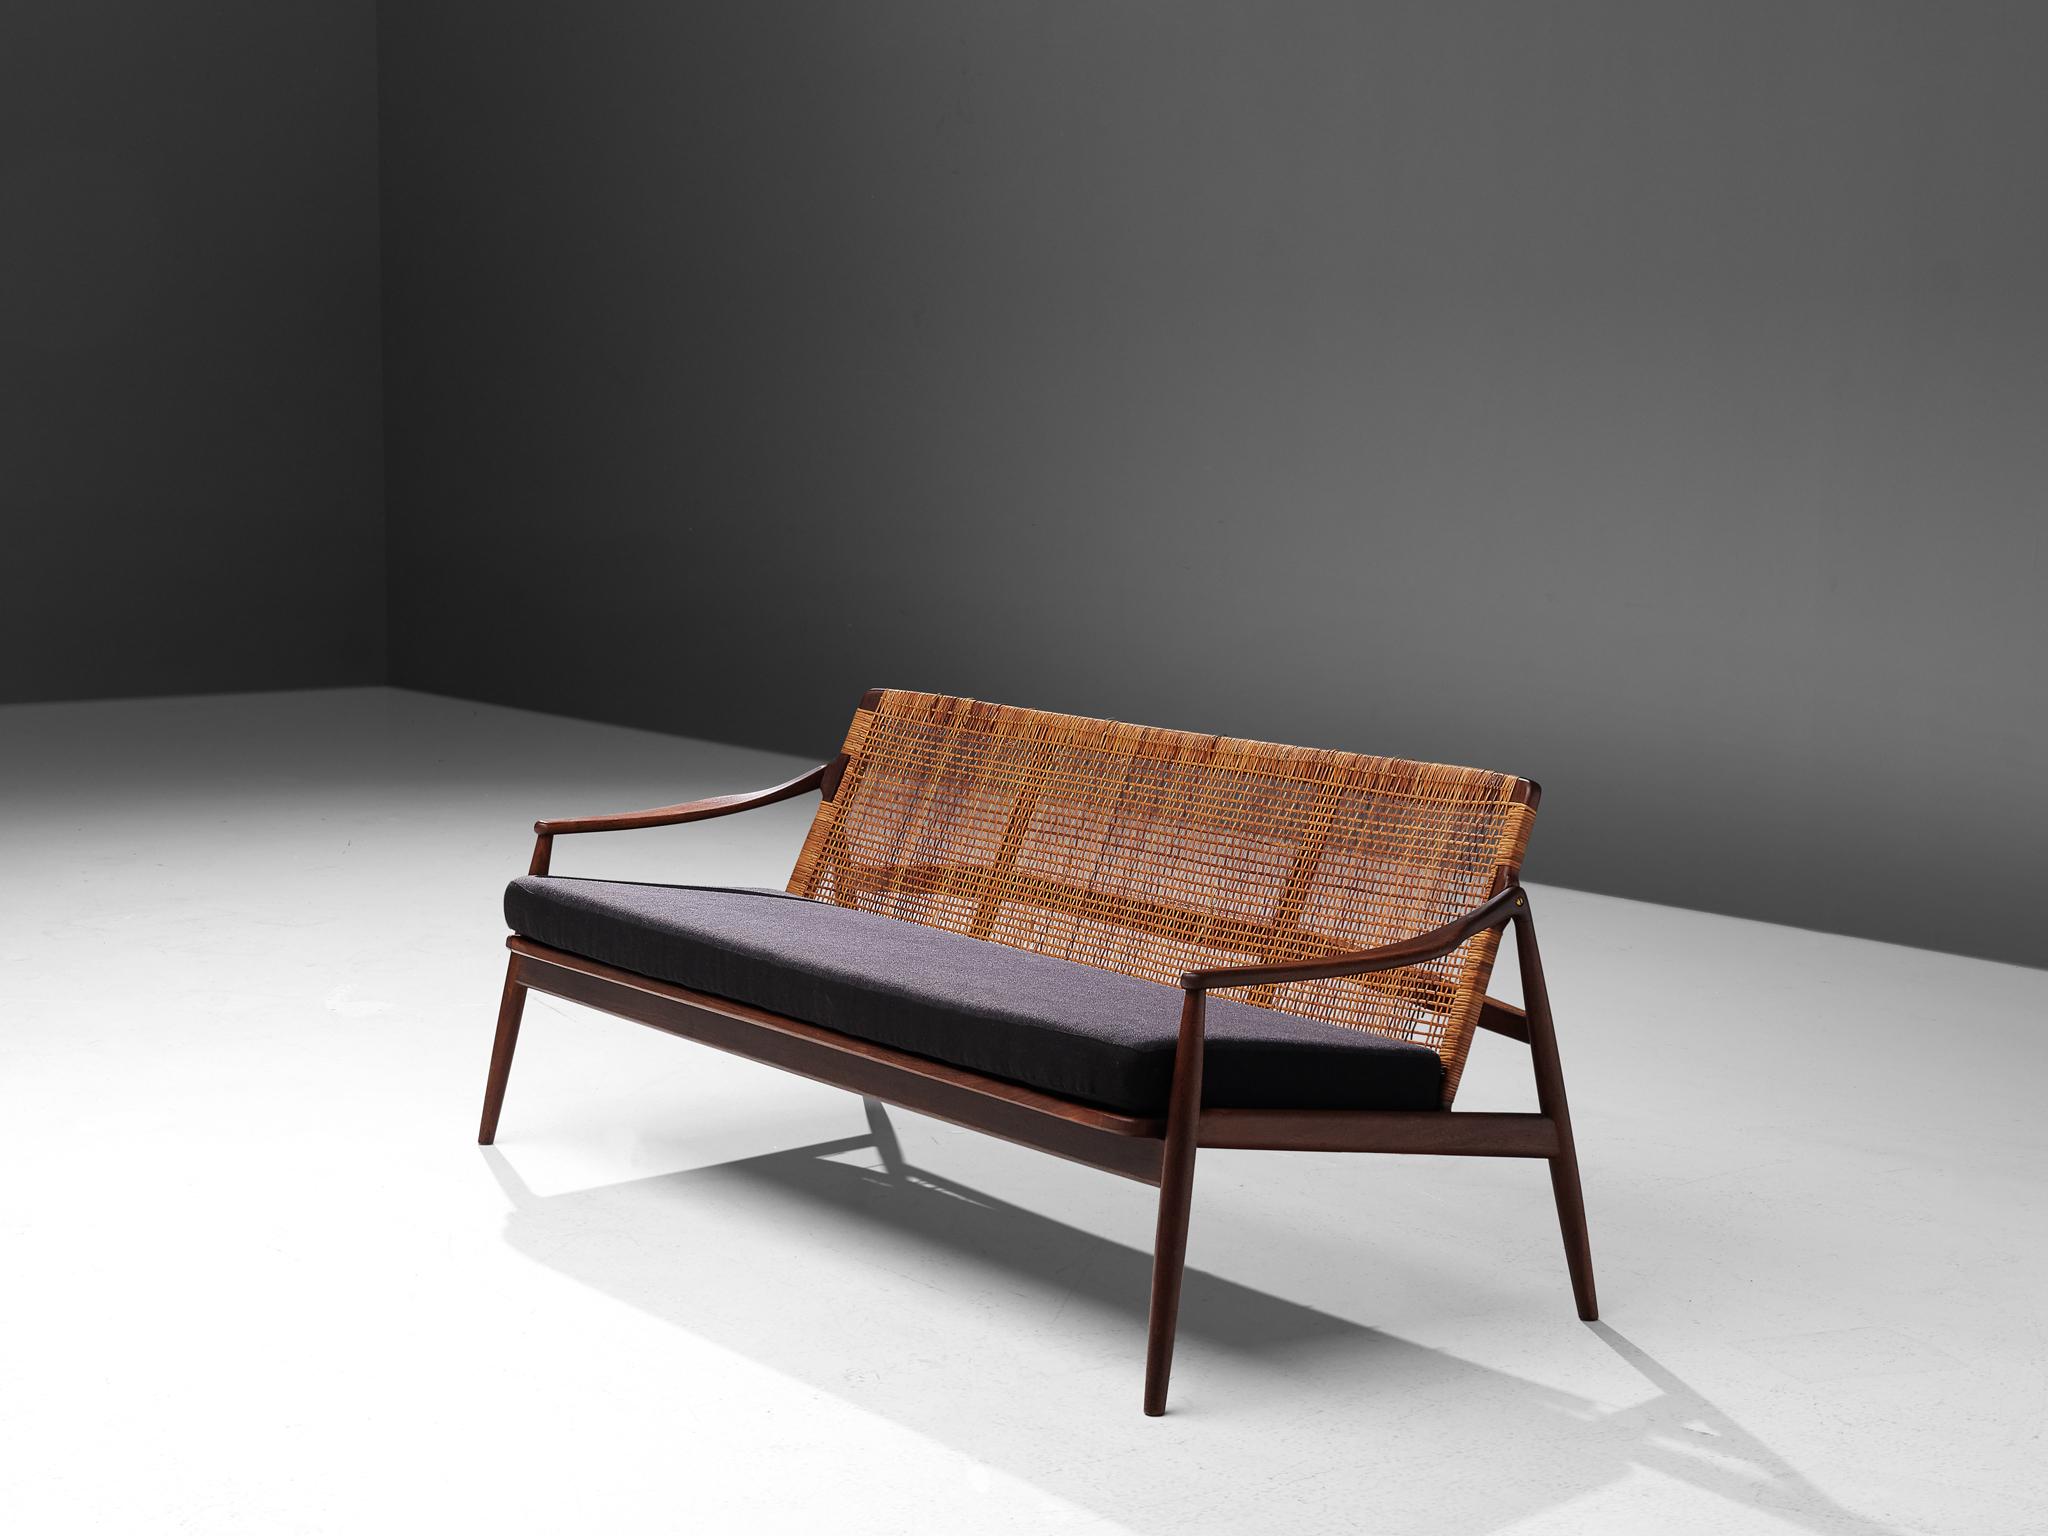 Hartmut Lohmeyer for Wilkhahn, sofa, fabric, teak and rattan, Germany, 1956.

The sofa-bench is sensuous and organically shaped. It features a slightly tilted back and is executed with tapered legs. The softly bent armrests and open frame create a